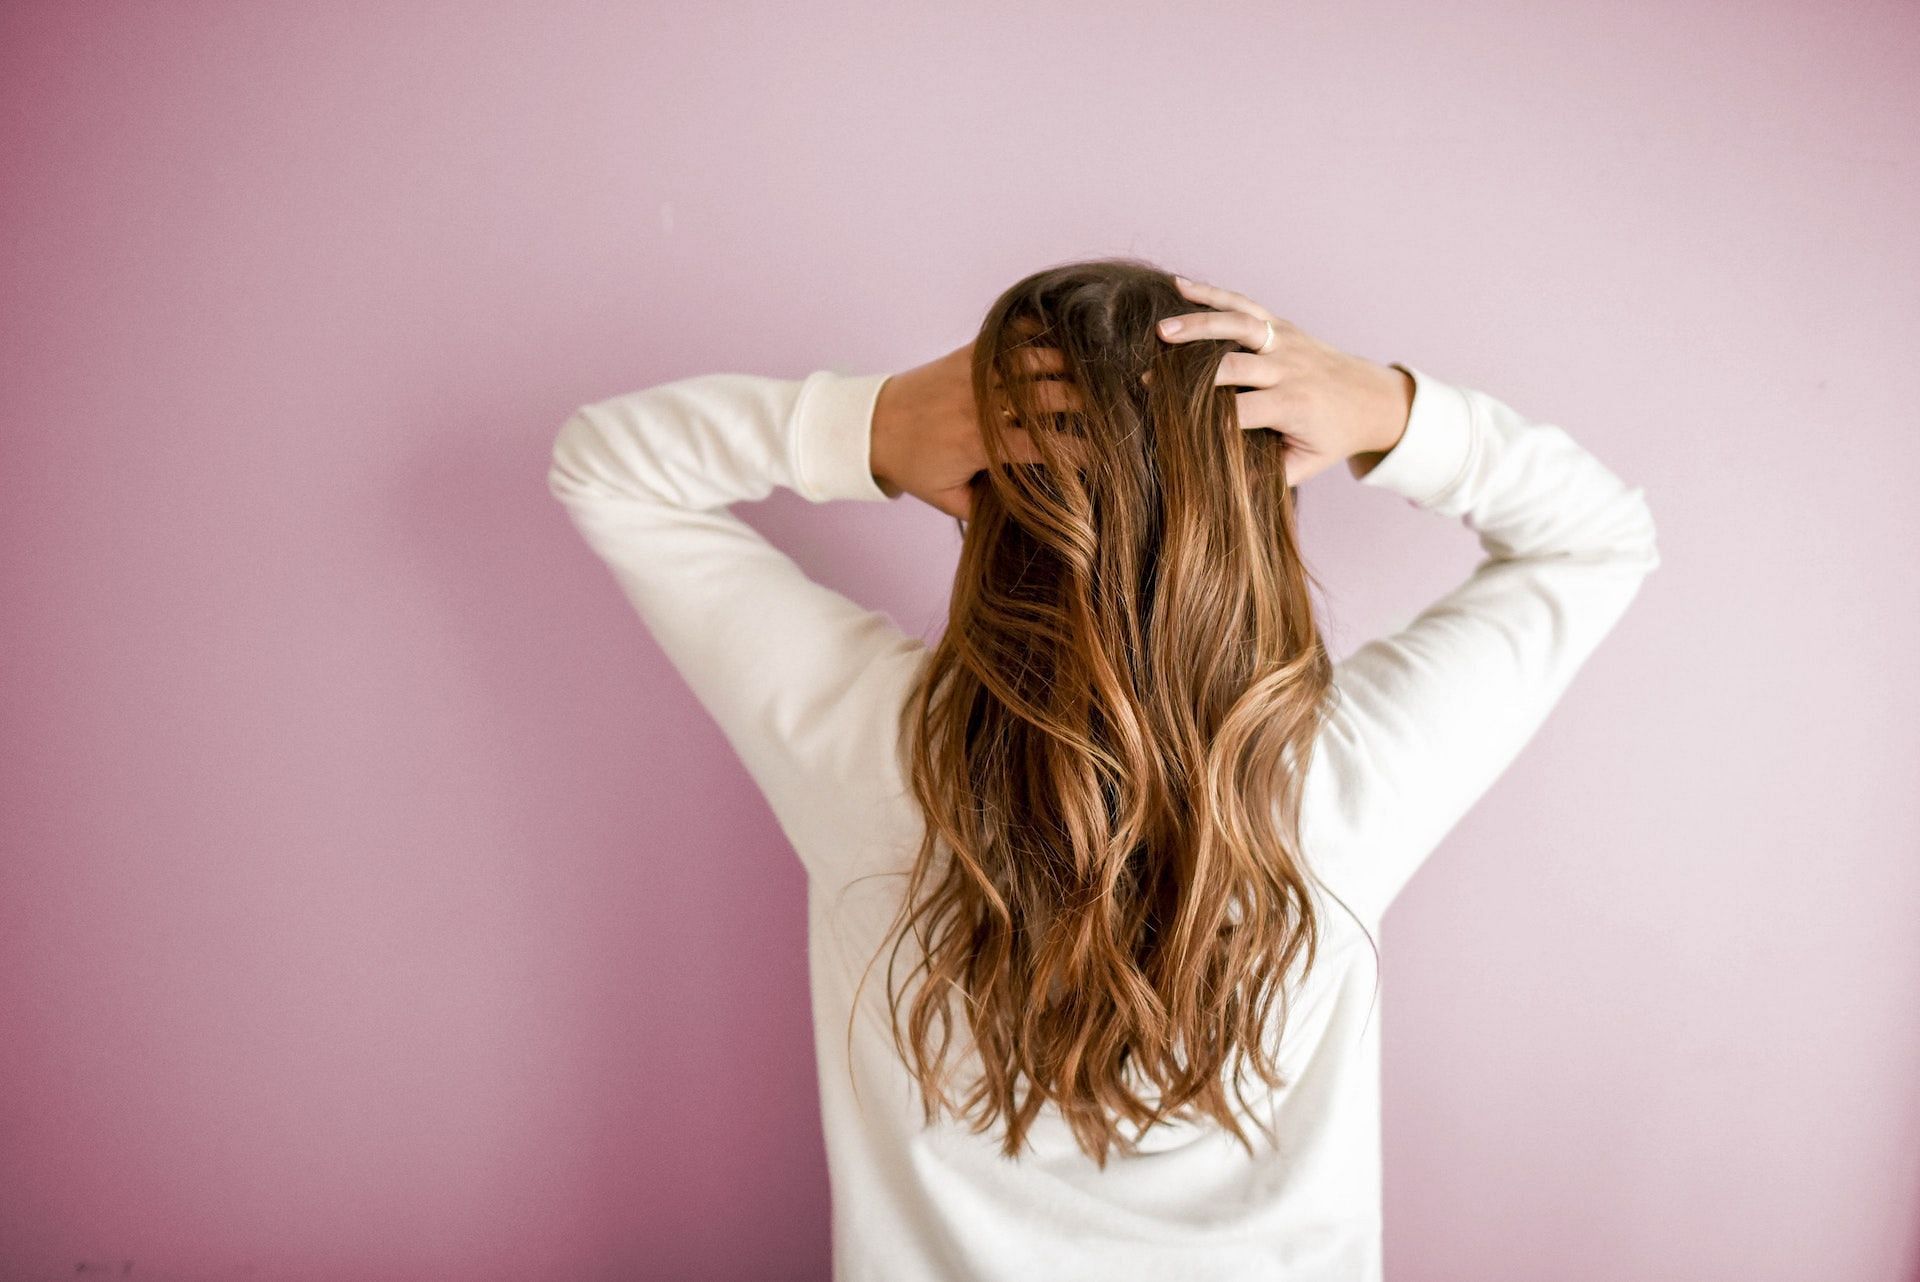 There are various ways to stimulate hair growth naturally. (Photo via Pexels/Element5 Digital)